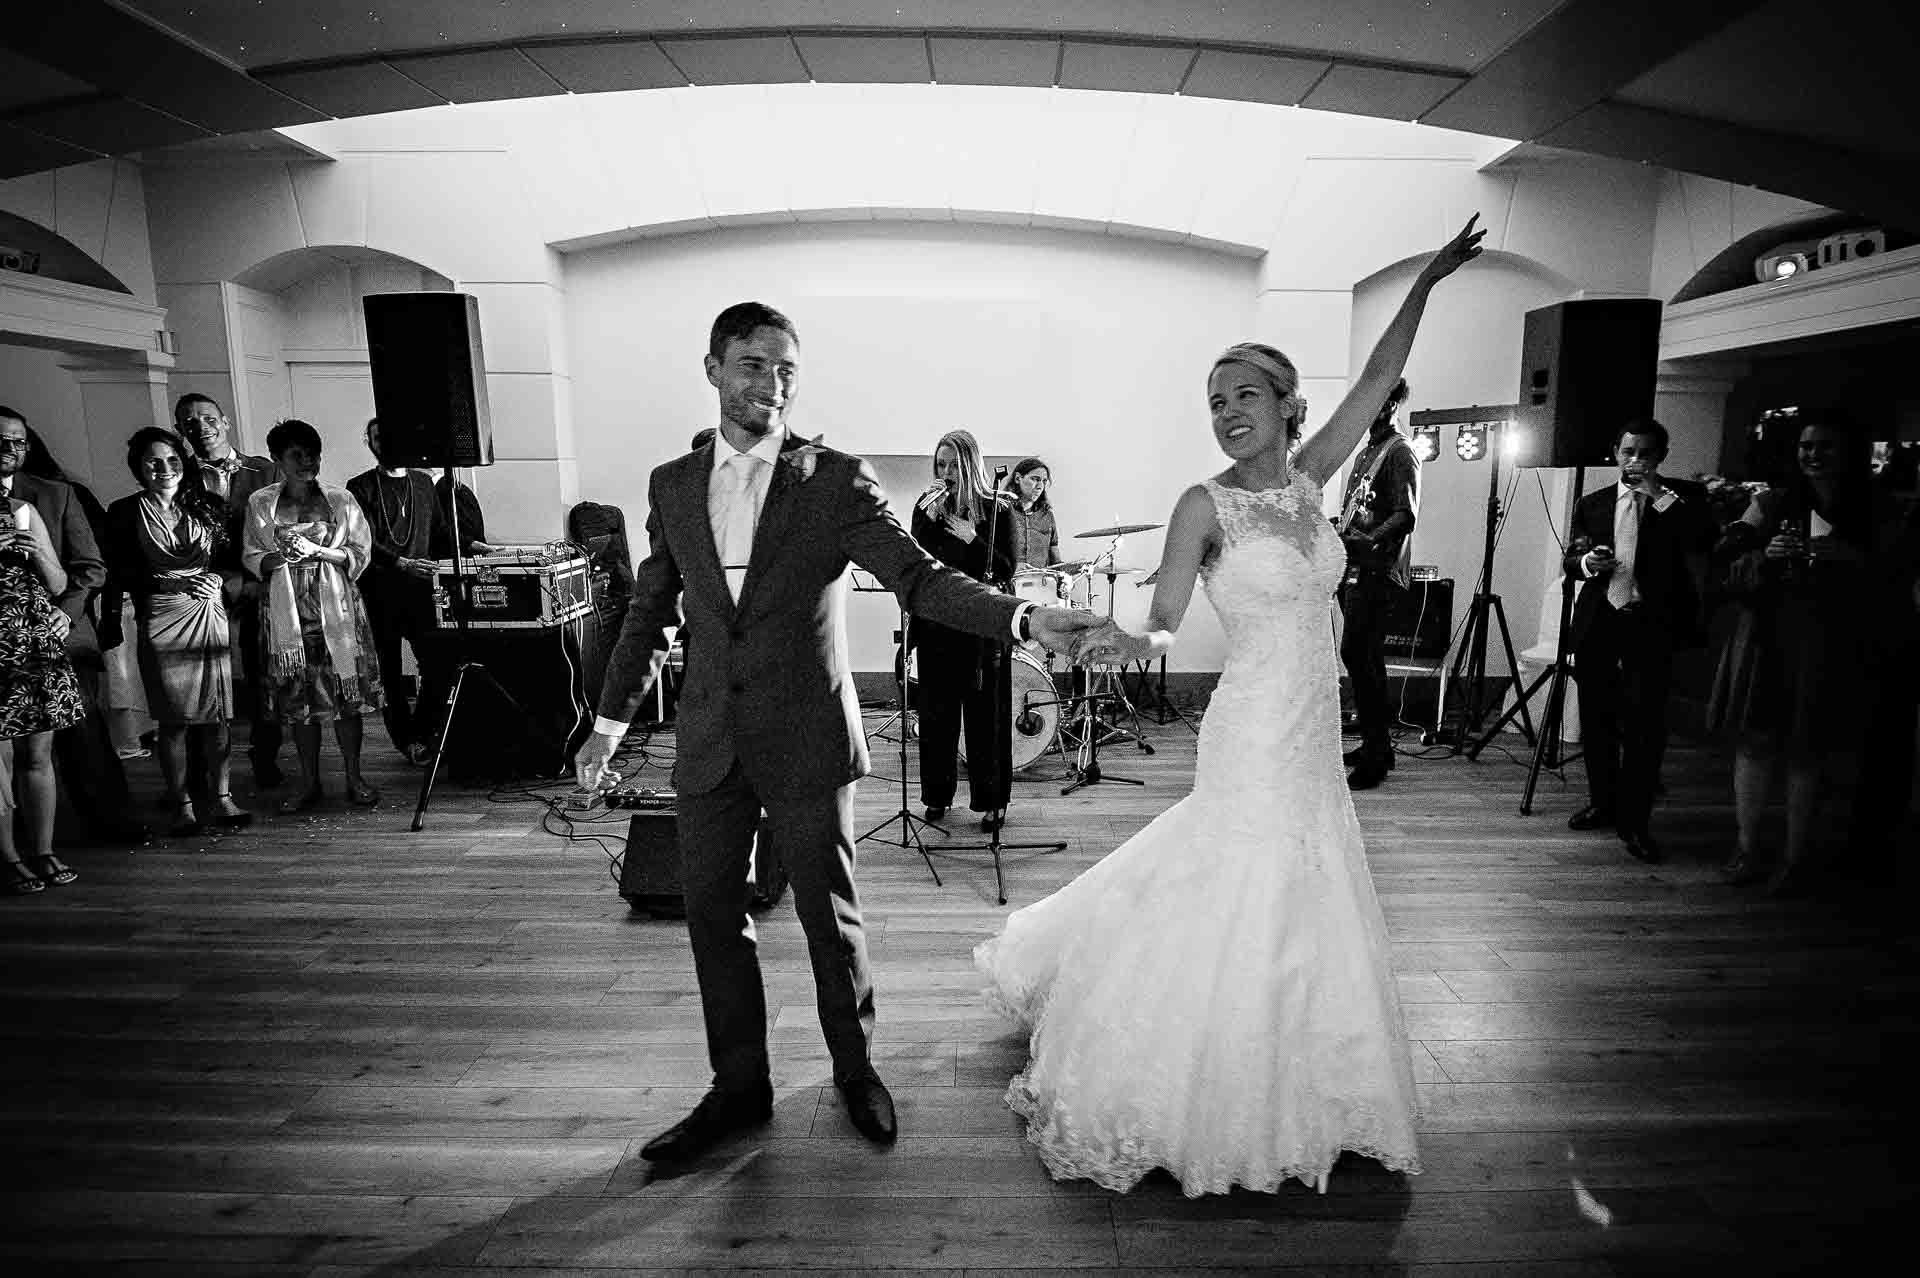 Bride and groom about to give first dance at wedding in London